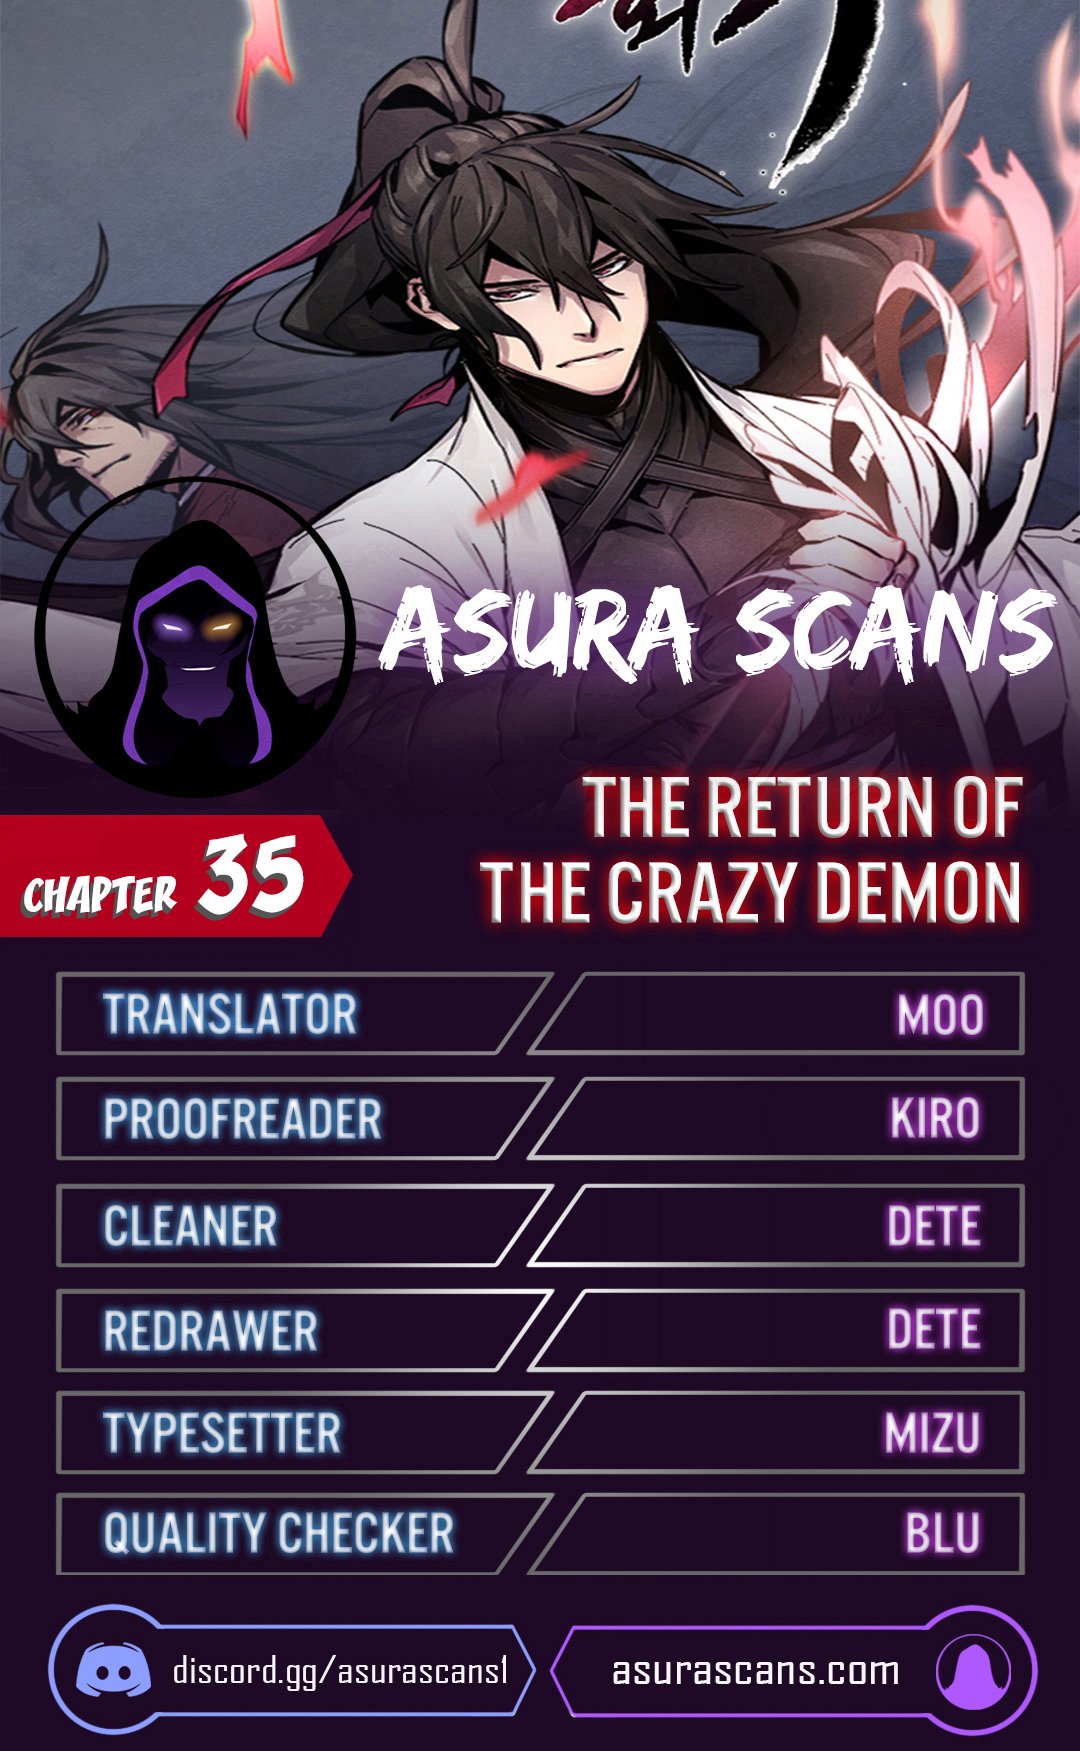 The Return of the Crazy Demon - Chapter 18576 - Image 1